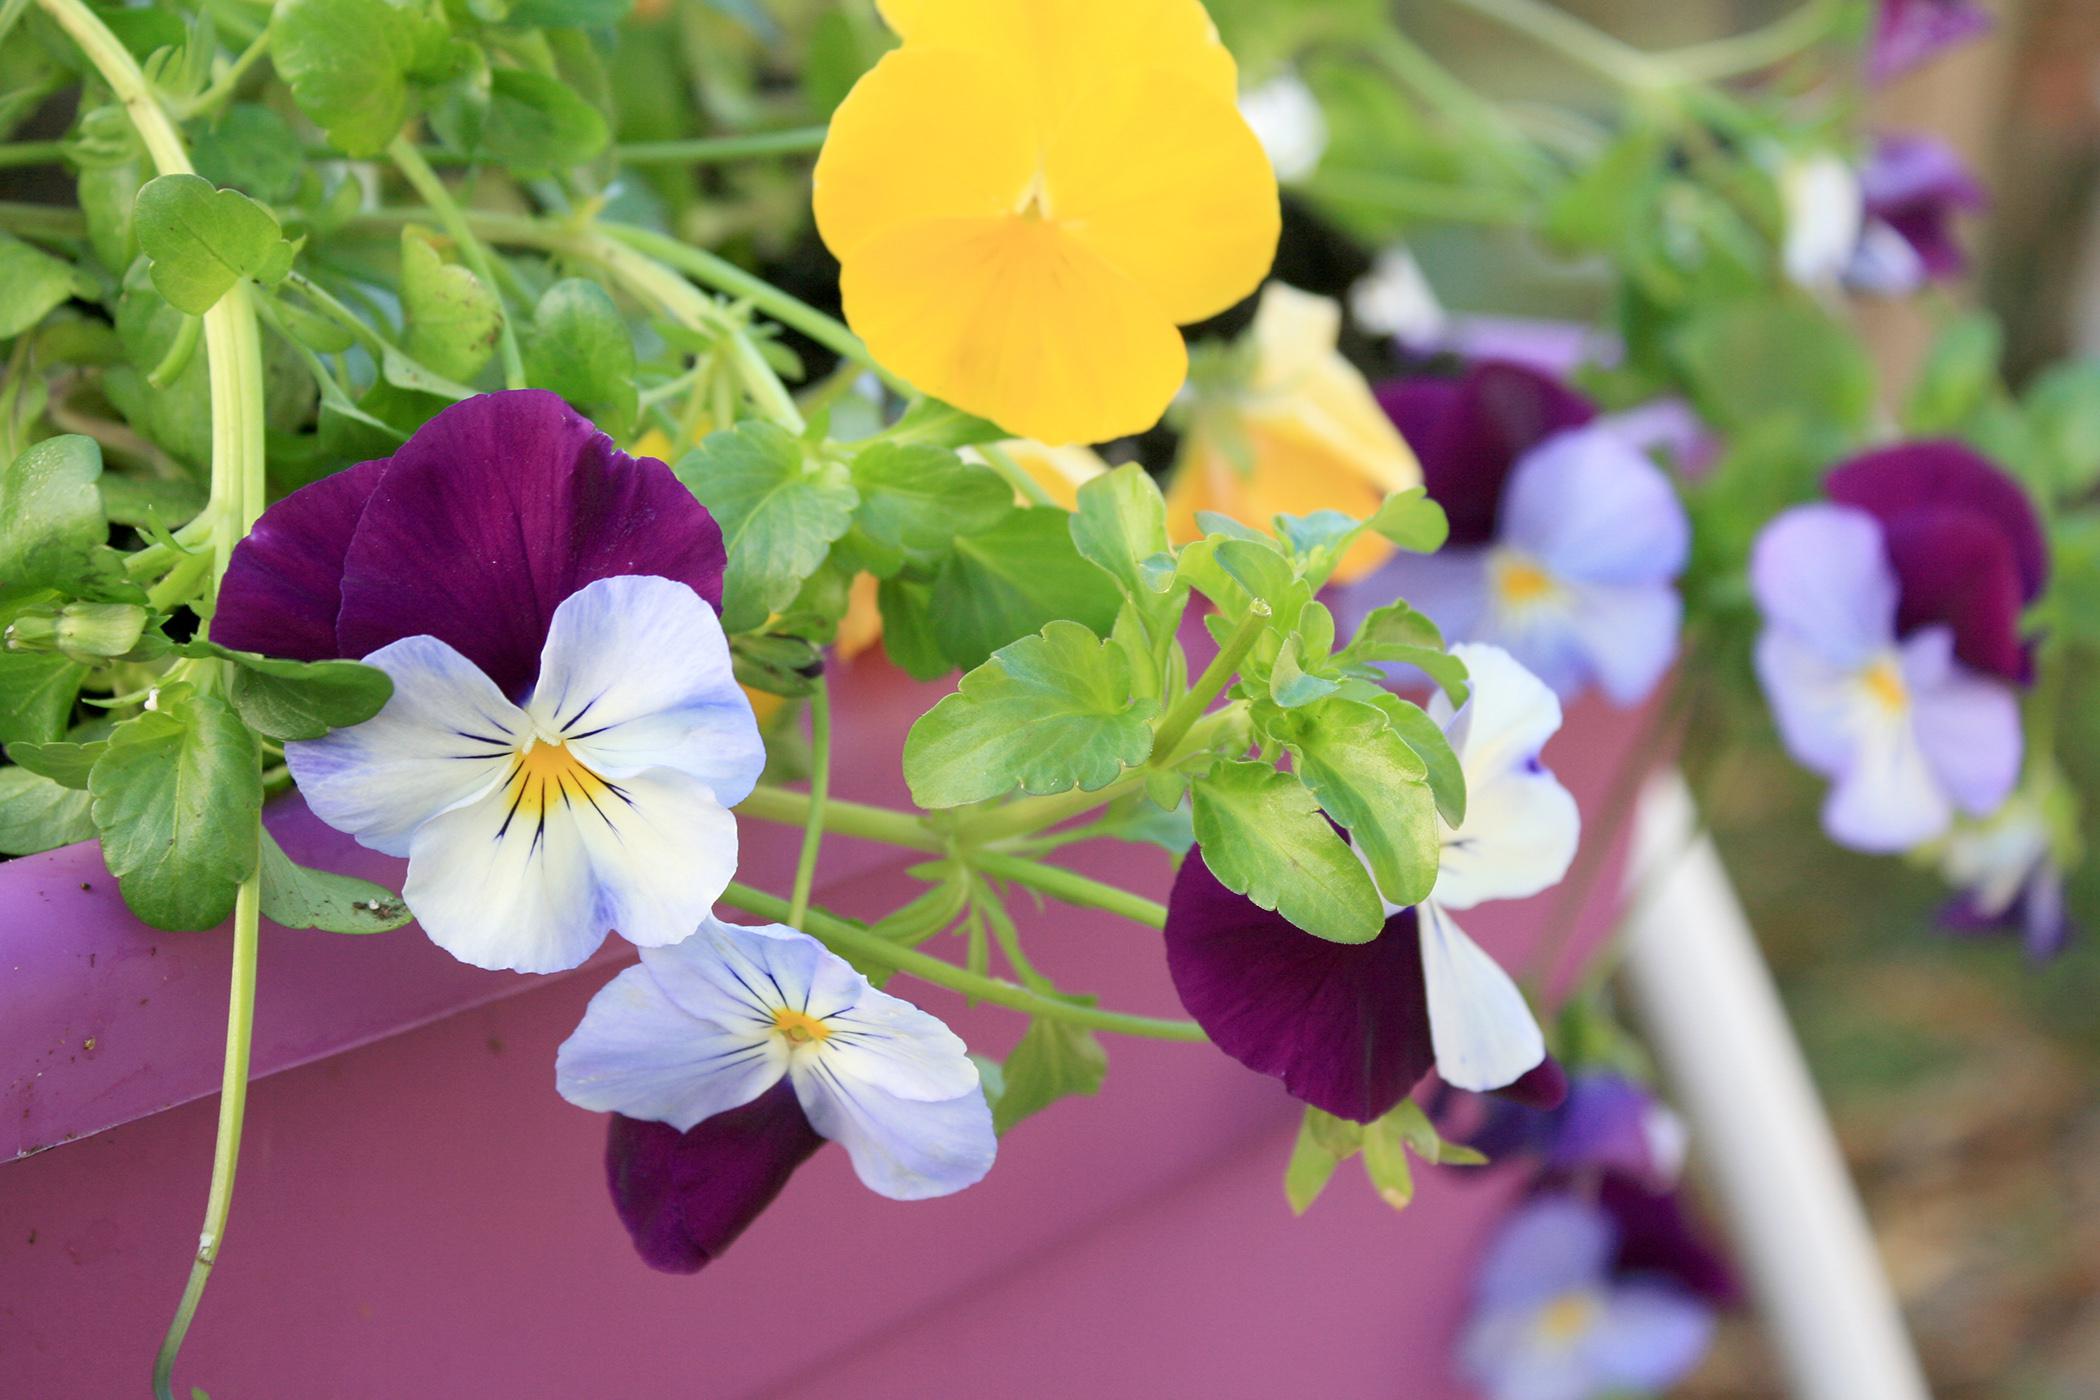 Cool Wave trailing pansies such as these Violet Wing and Lemon pansies have a unique spreading and trailing growth habit that makes them must-haves in gardens. (Photo by MSU Extension Service/Gary Bachman)